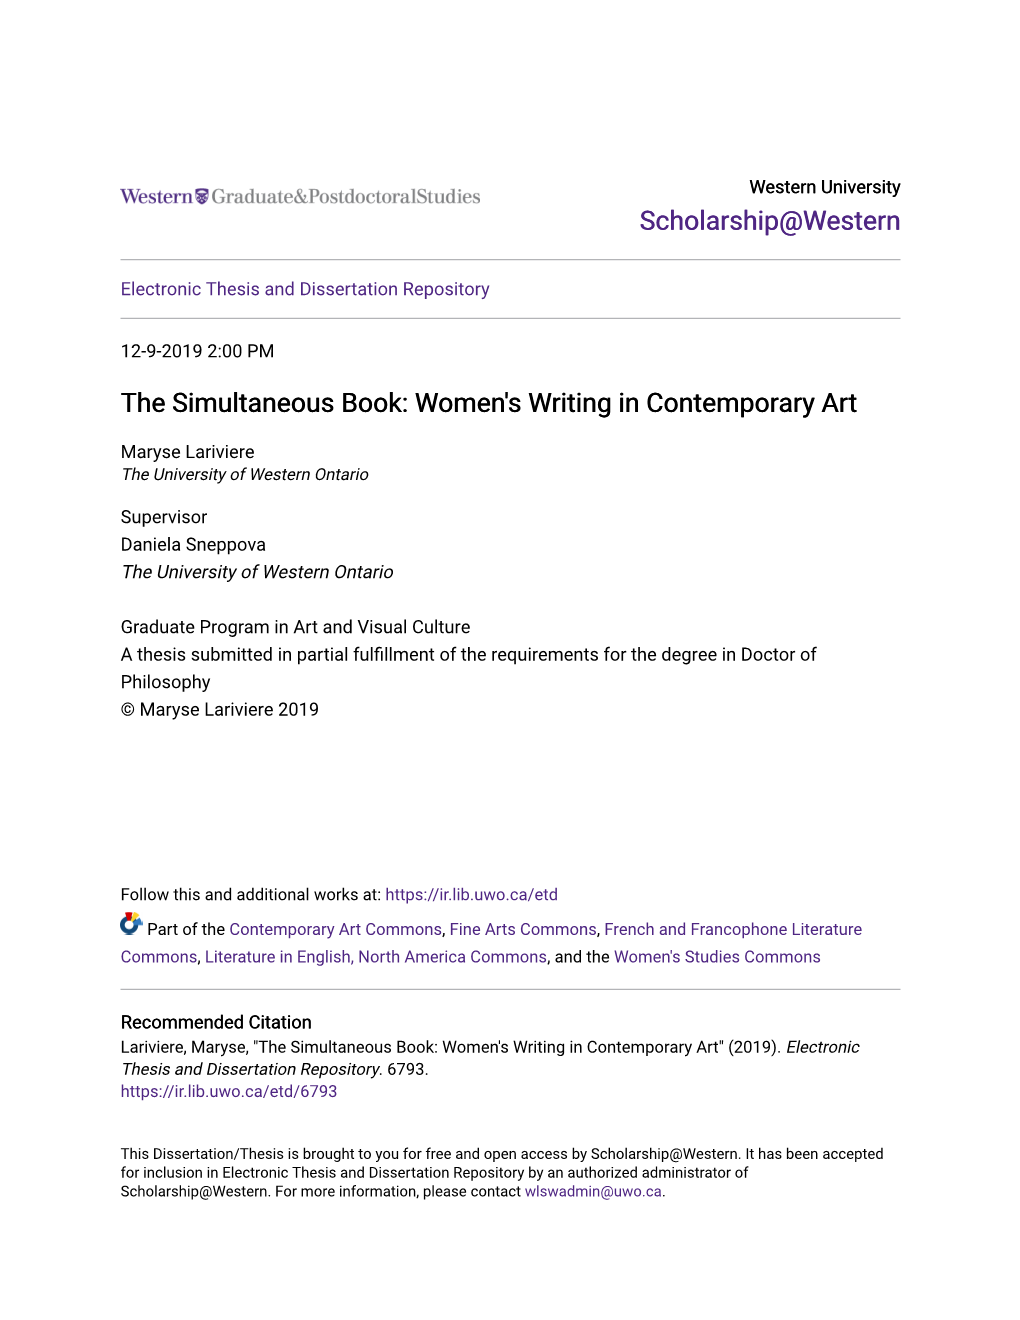 The Simultaneous Book: Women's Writing in Contemporary Art